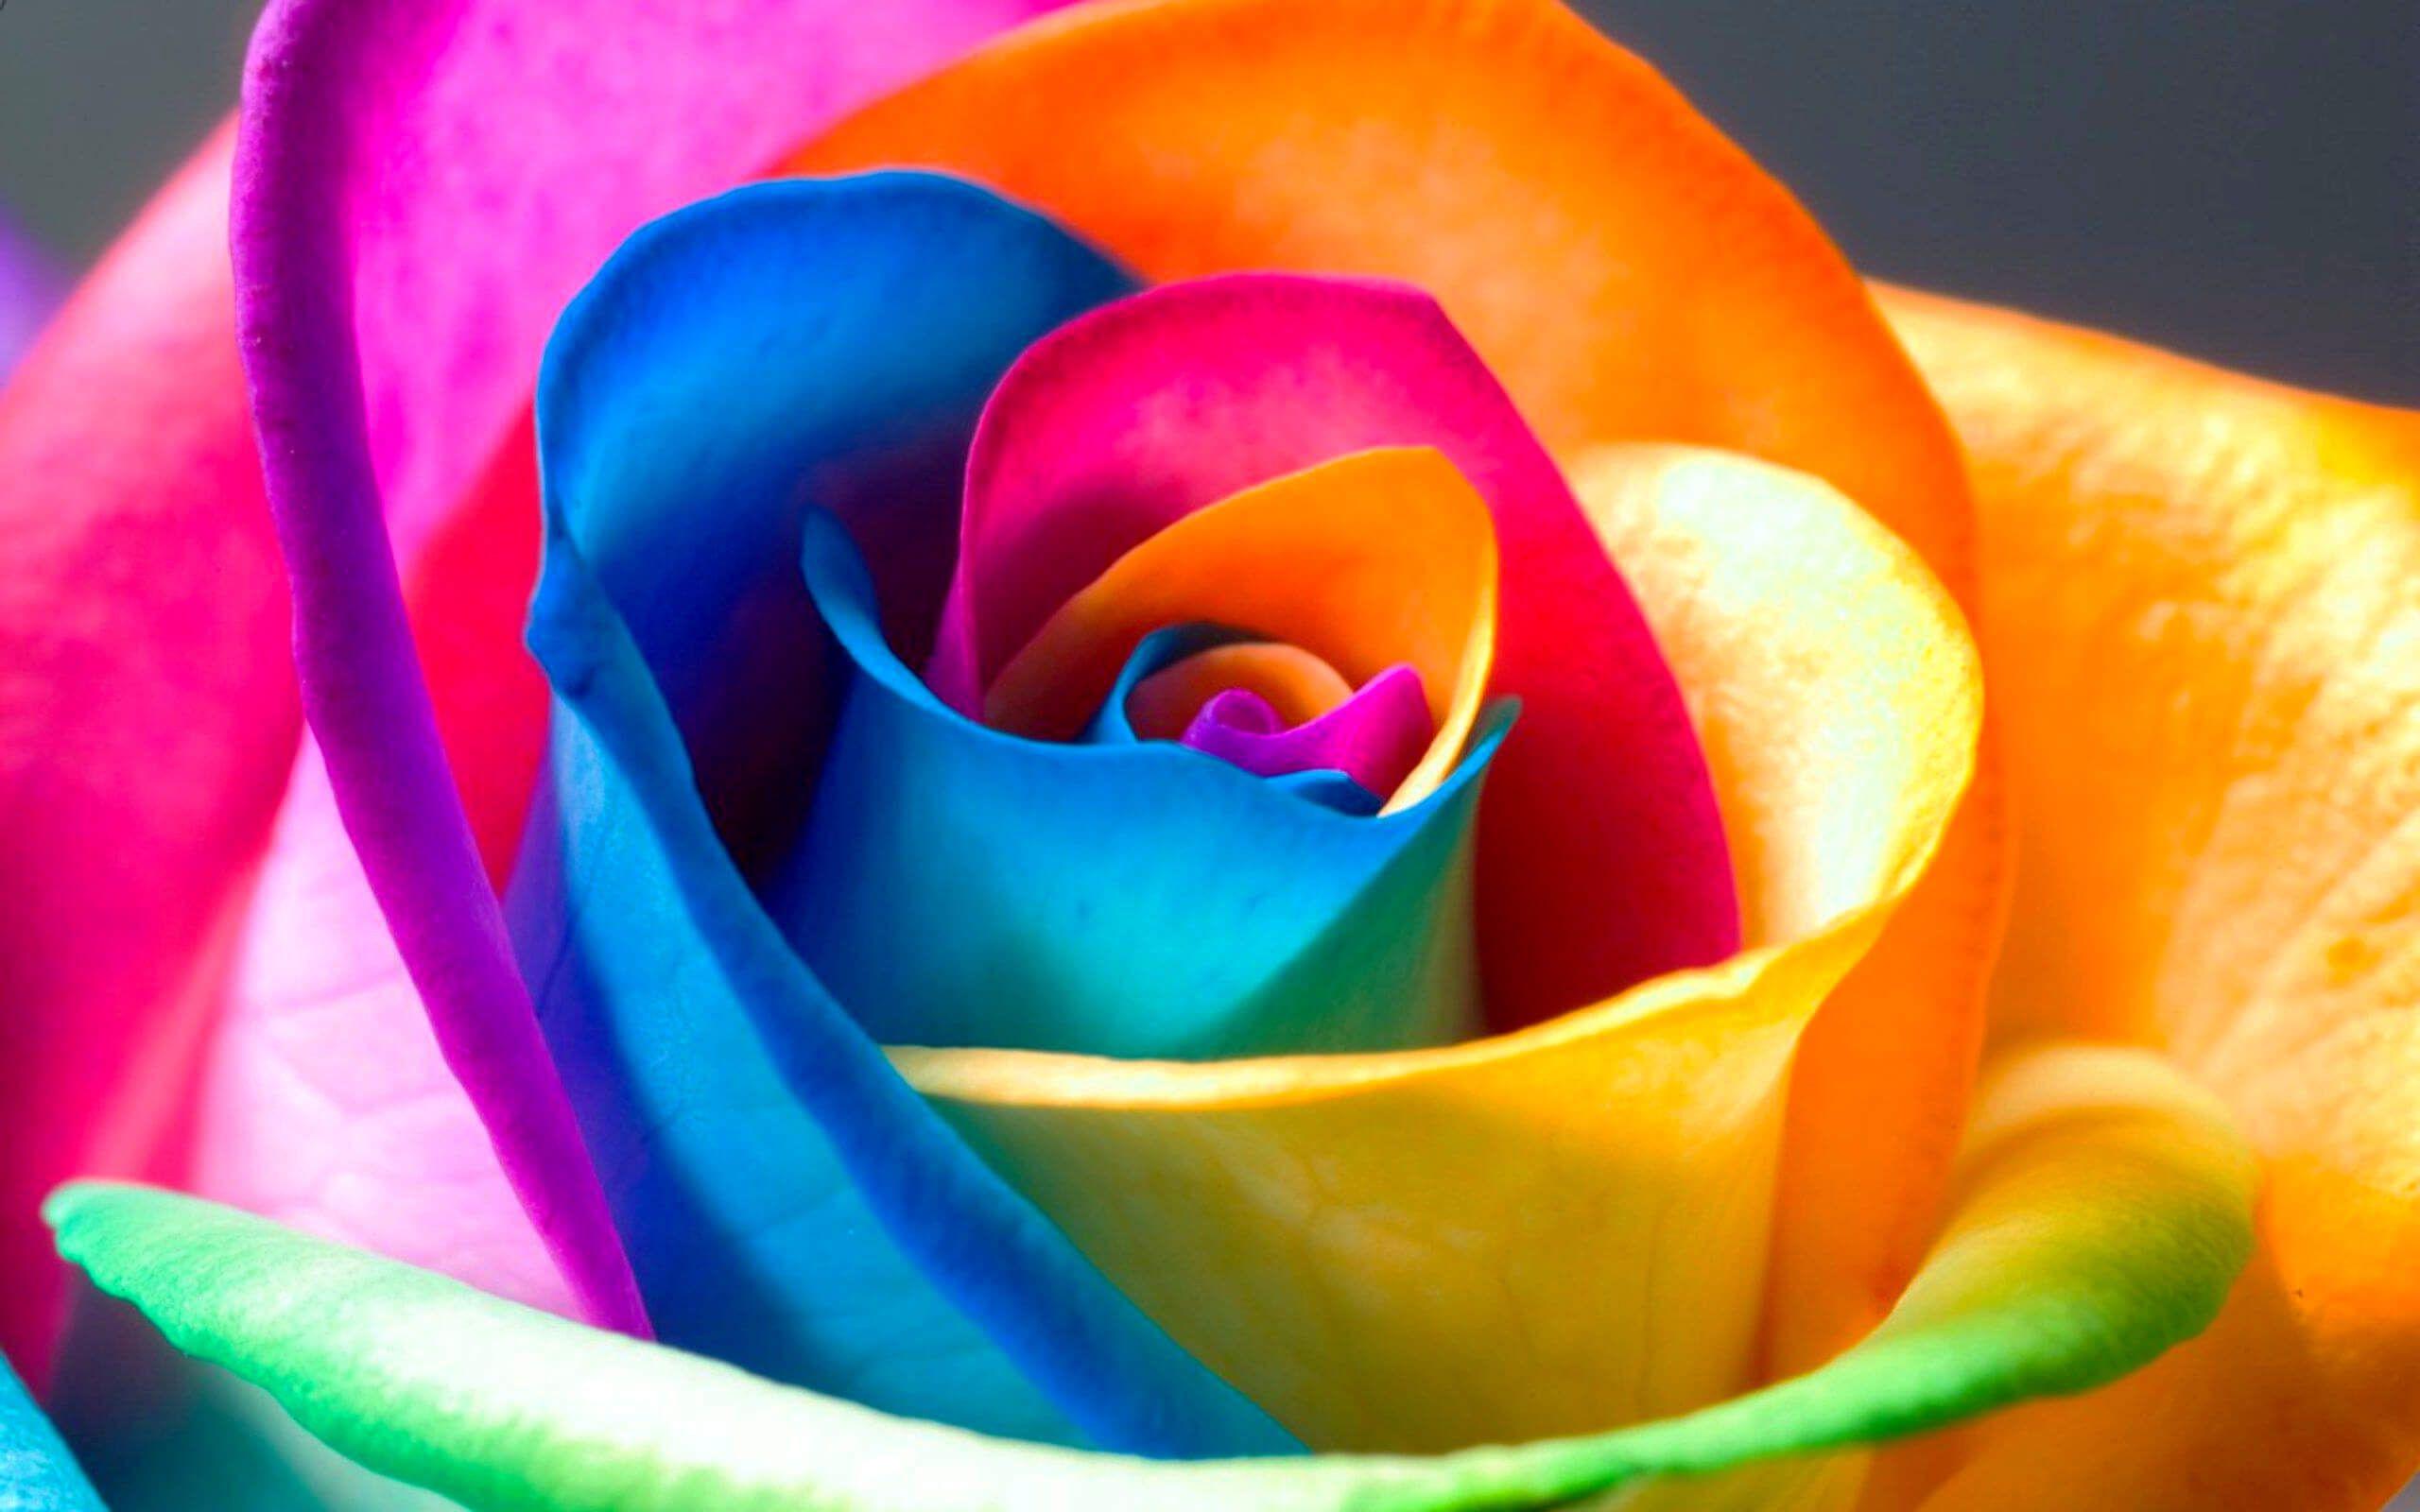 For Your Desktop: 36 Top Quality Colorful Rose Wallpaper, B.SCB